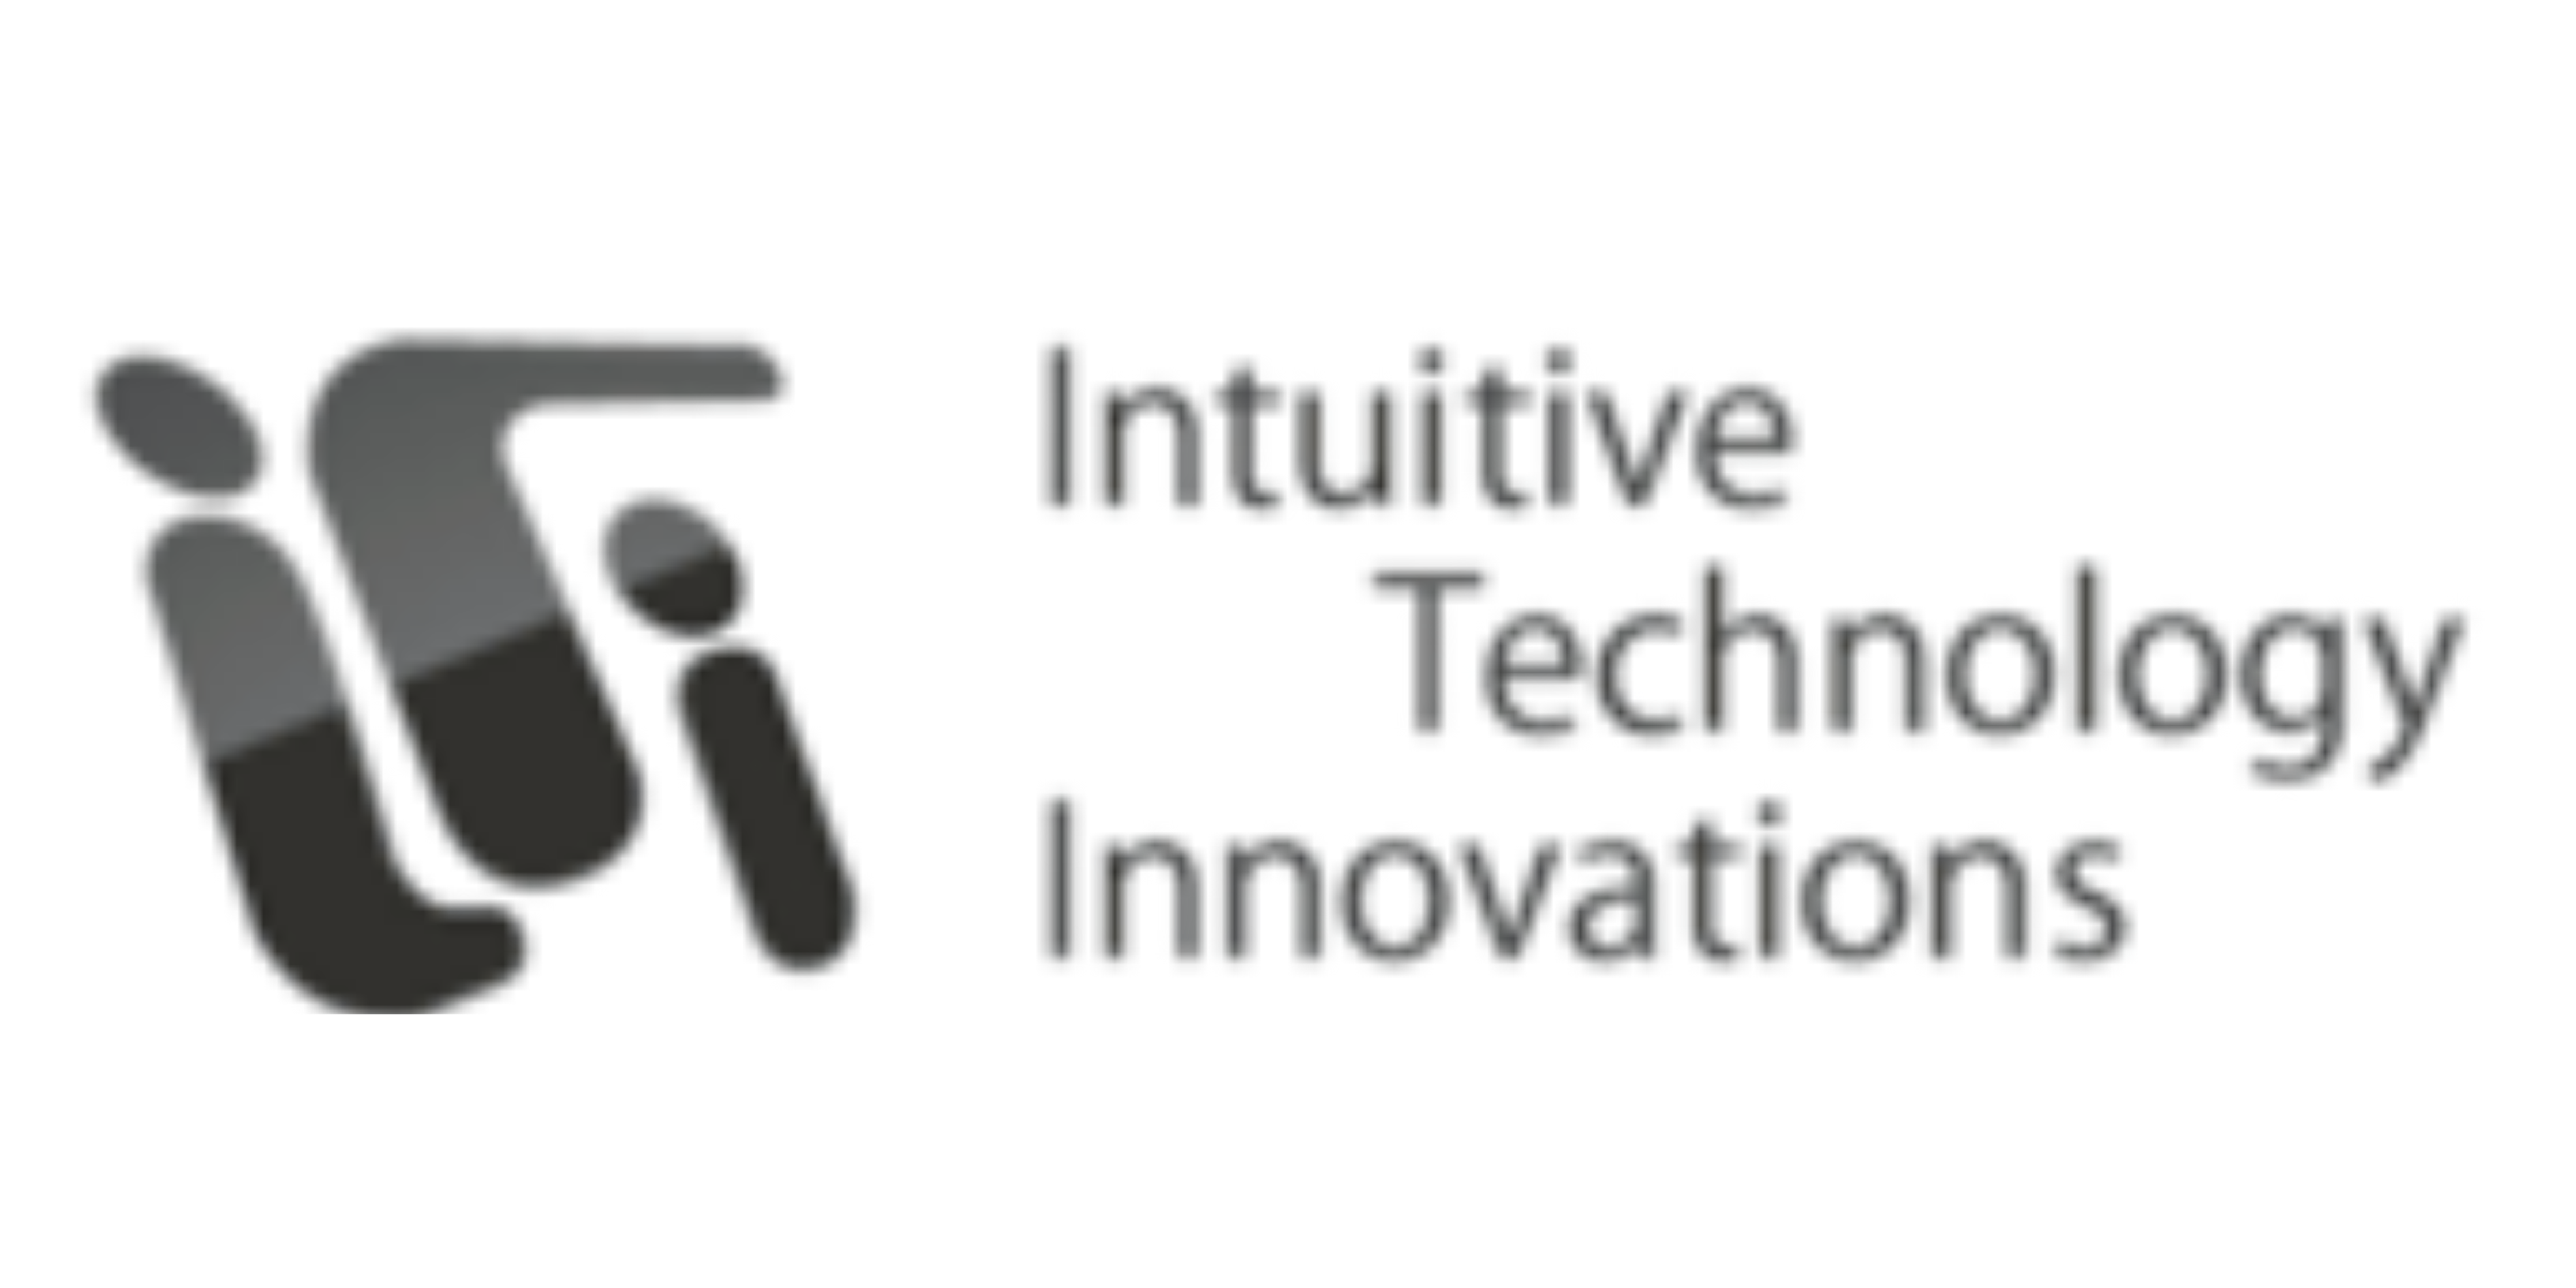 Intuitive Technology Innovations Logo